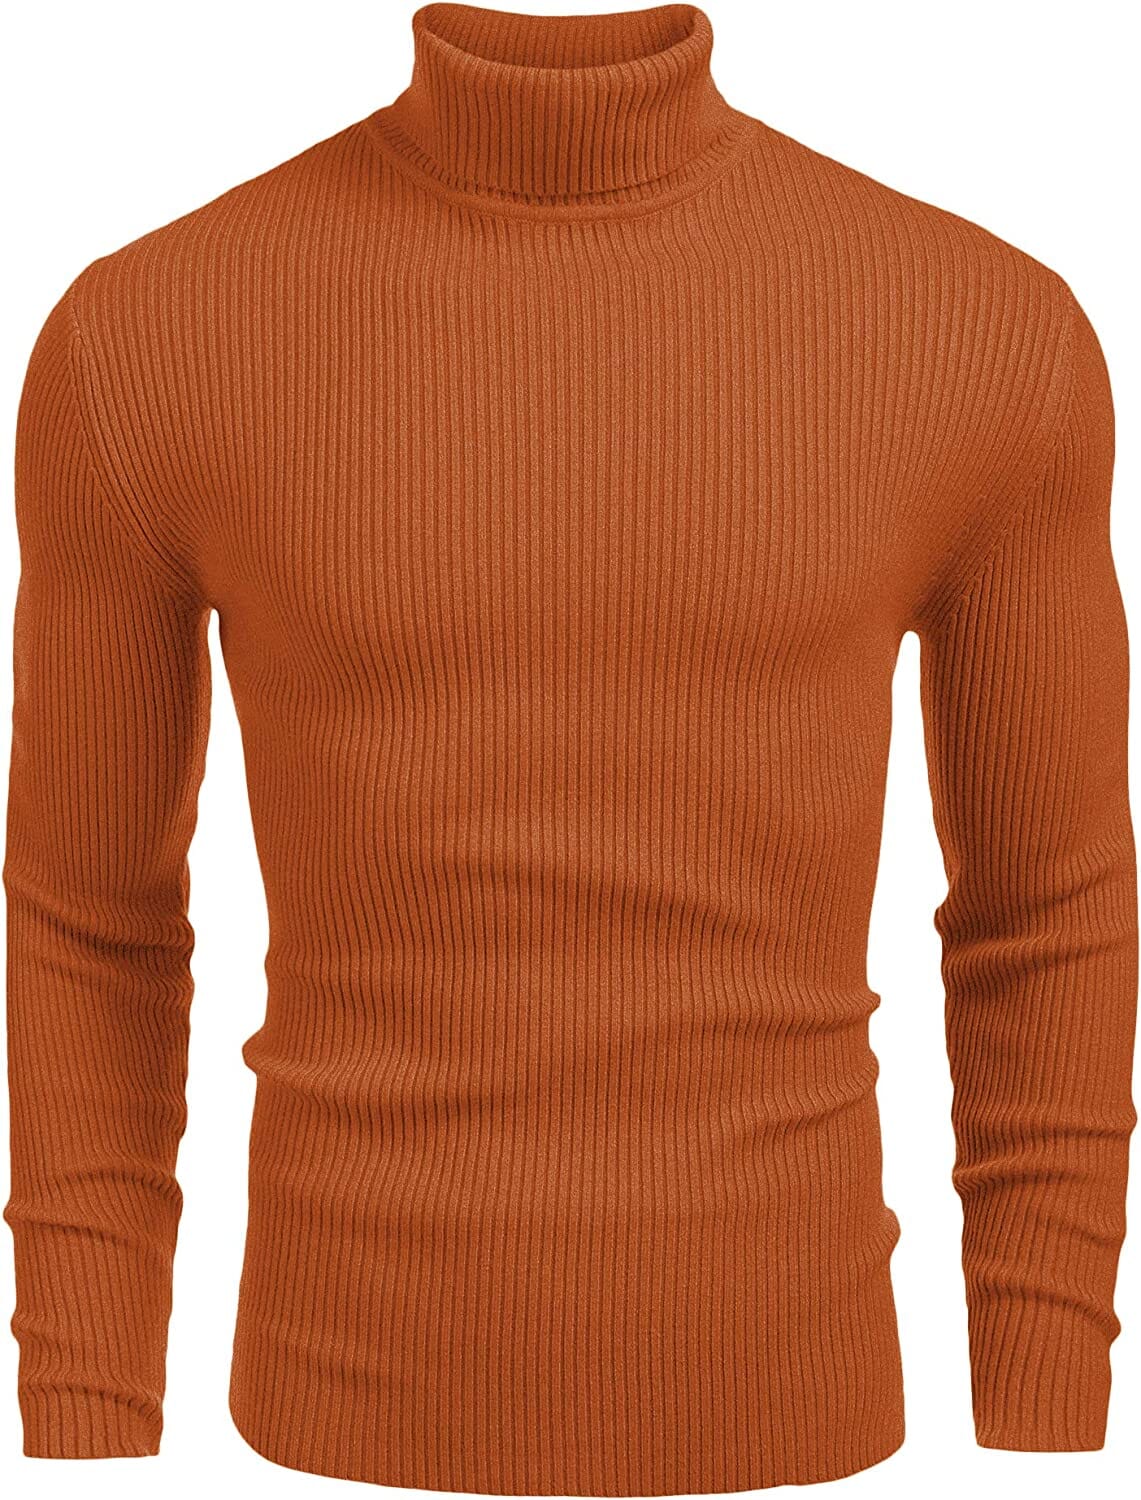 Ribbed Slim Fit Knitted Pullover Turtleneck Sweater (US Only) Sweaters COOFANDY Store British Tan S 